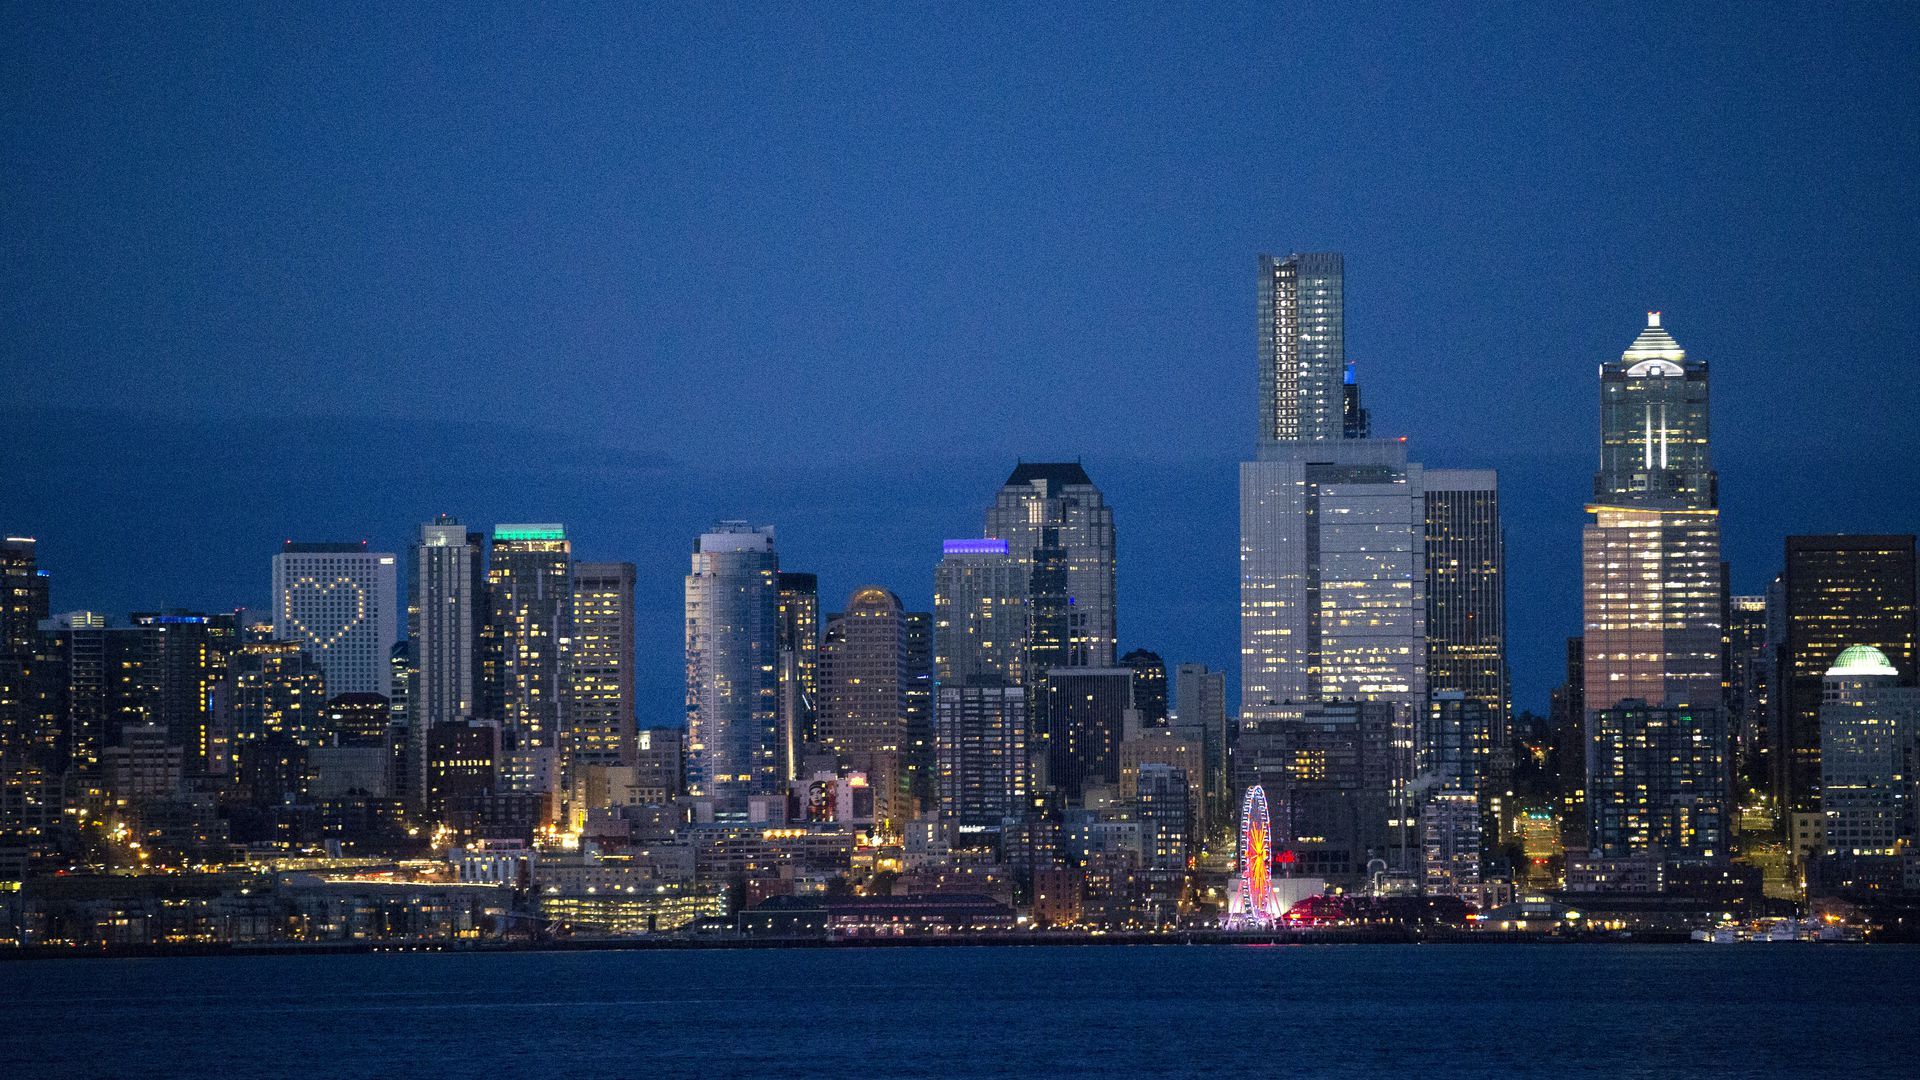 Seattle after sunset.